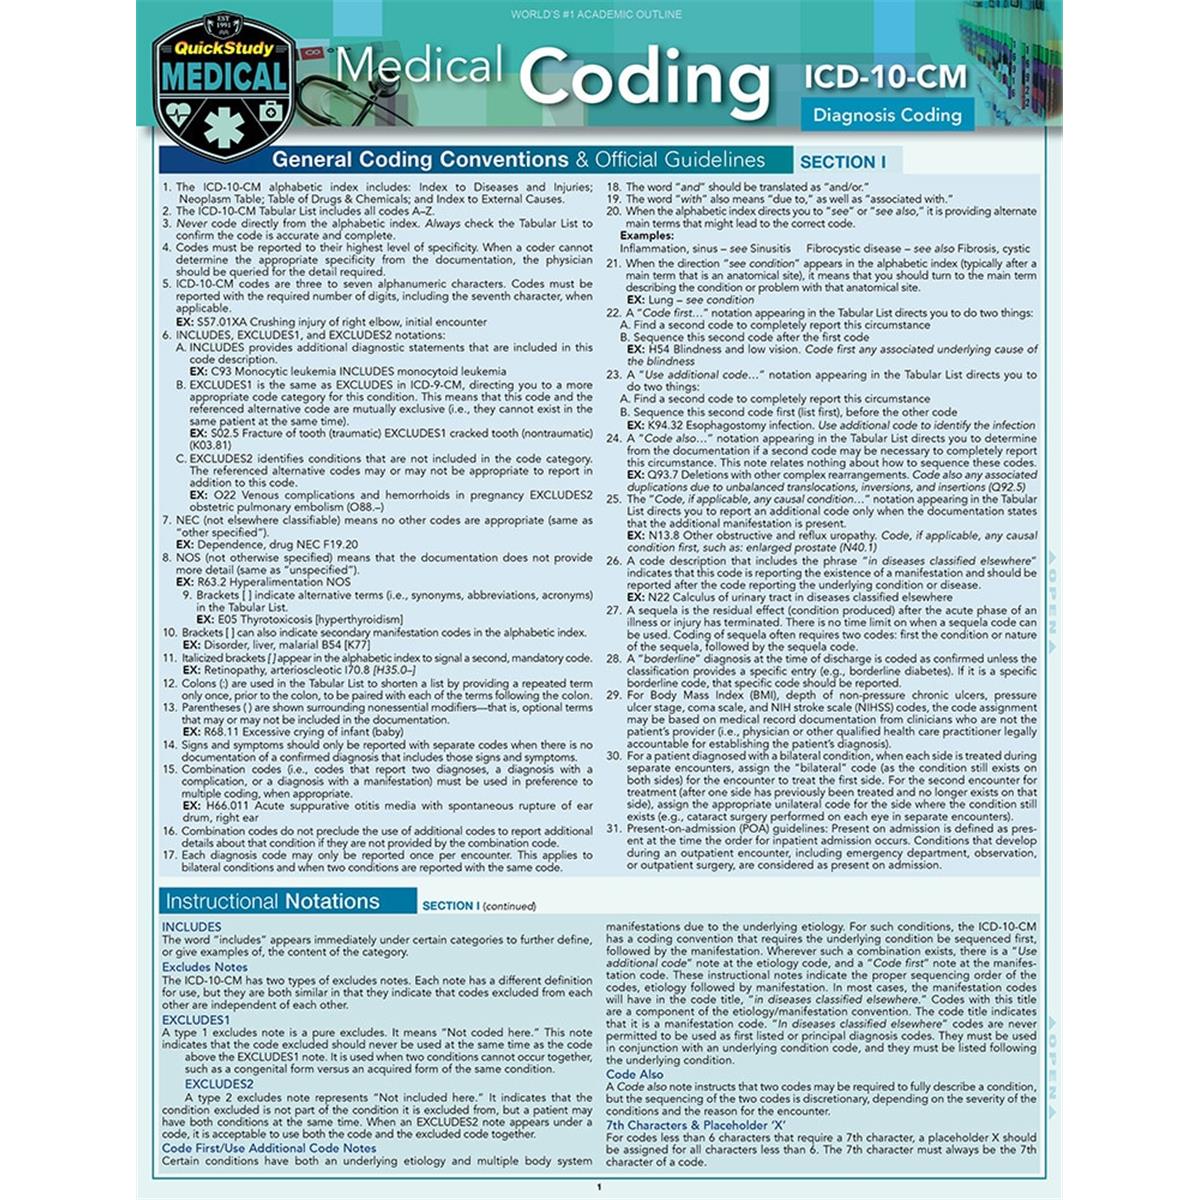 Picture of BarCharts 9781423236542 Medical Coding ICD-10-CM Laminated Reference Guide